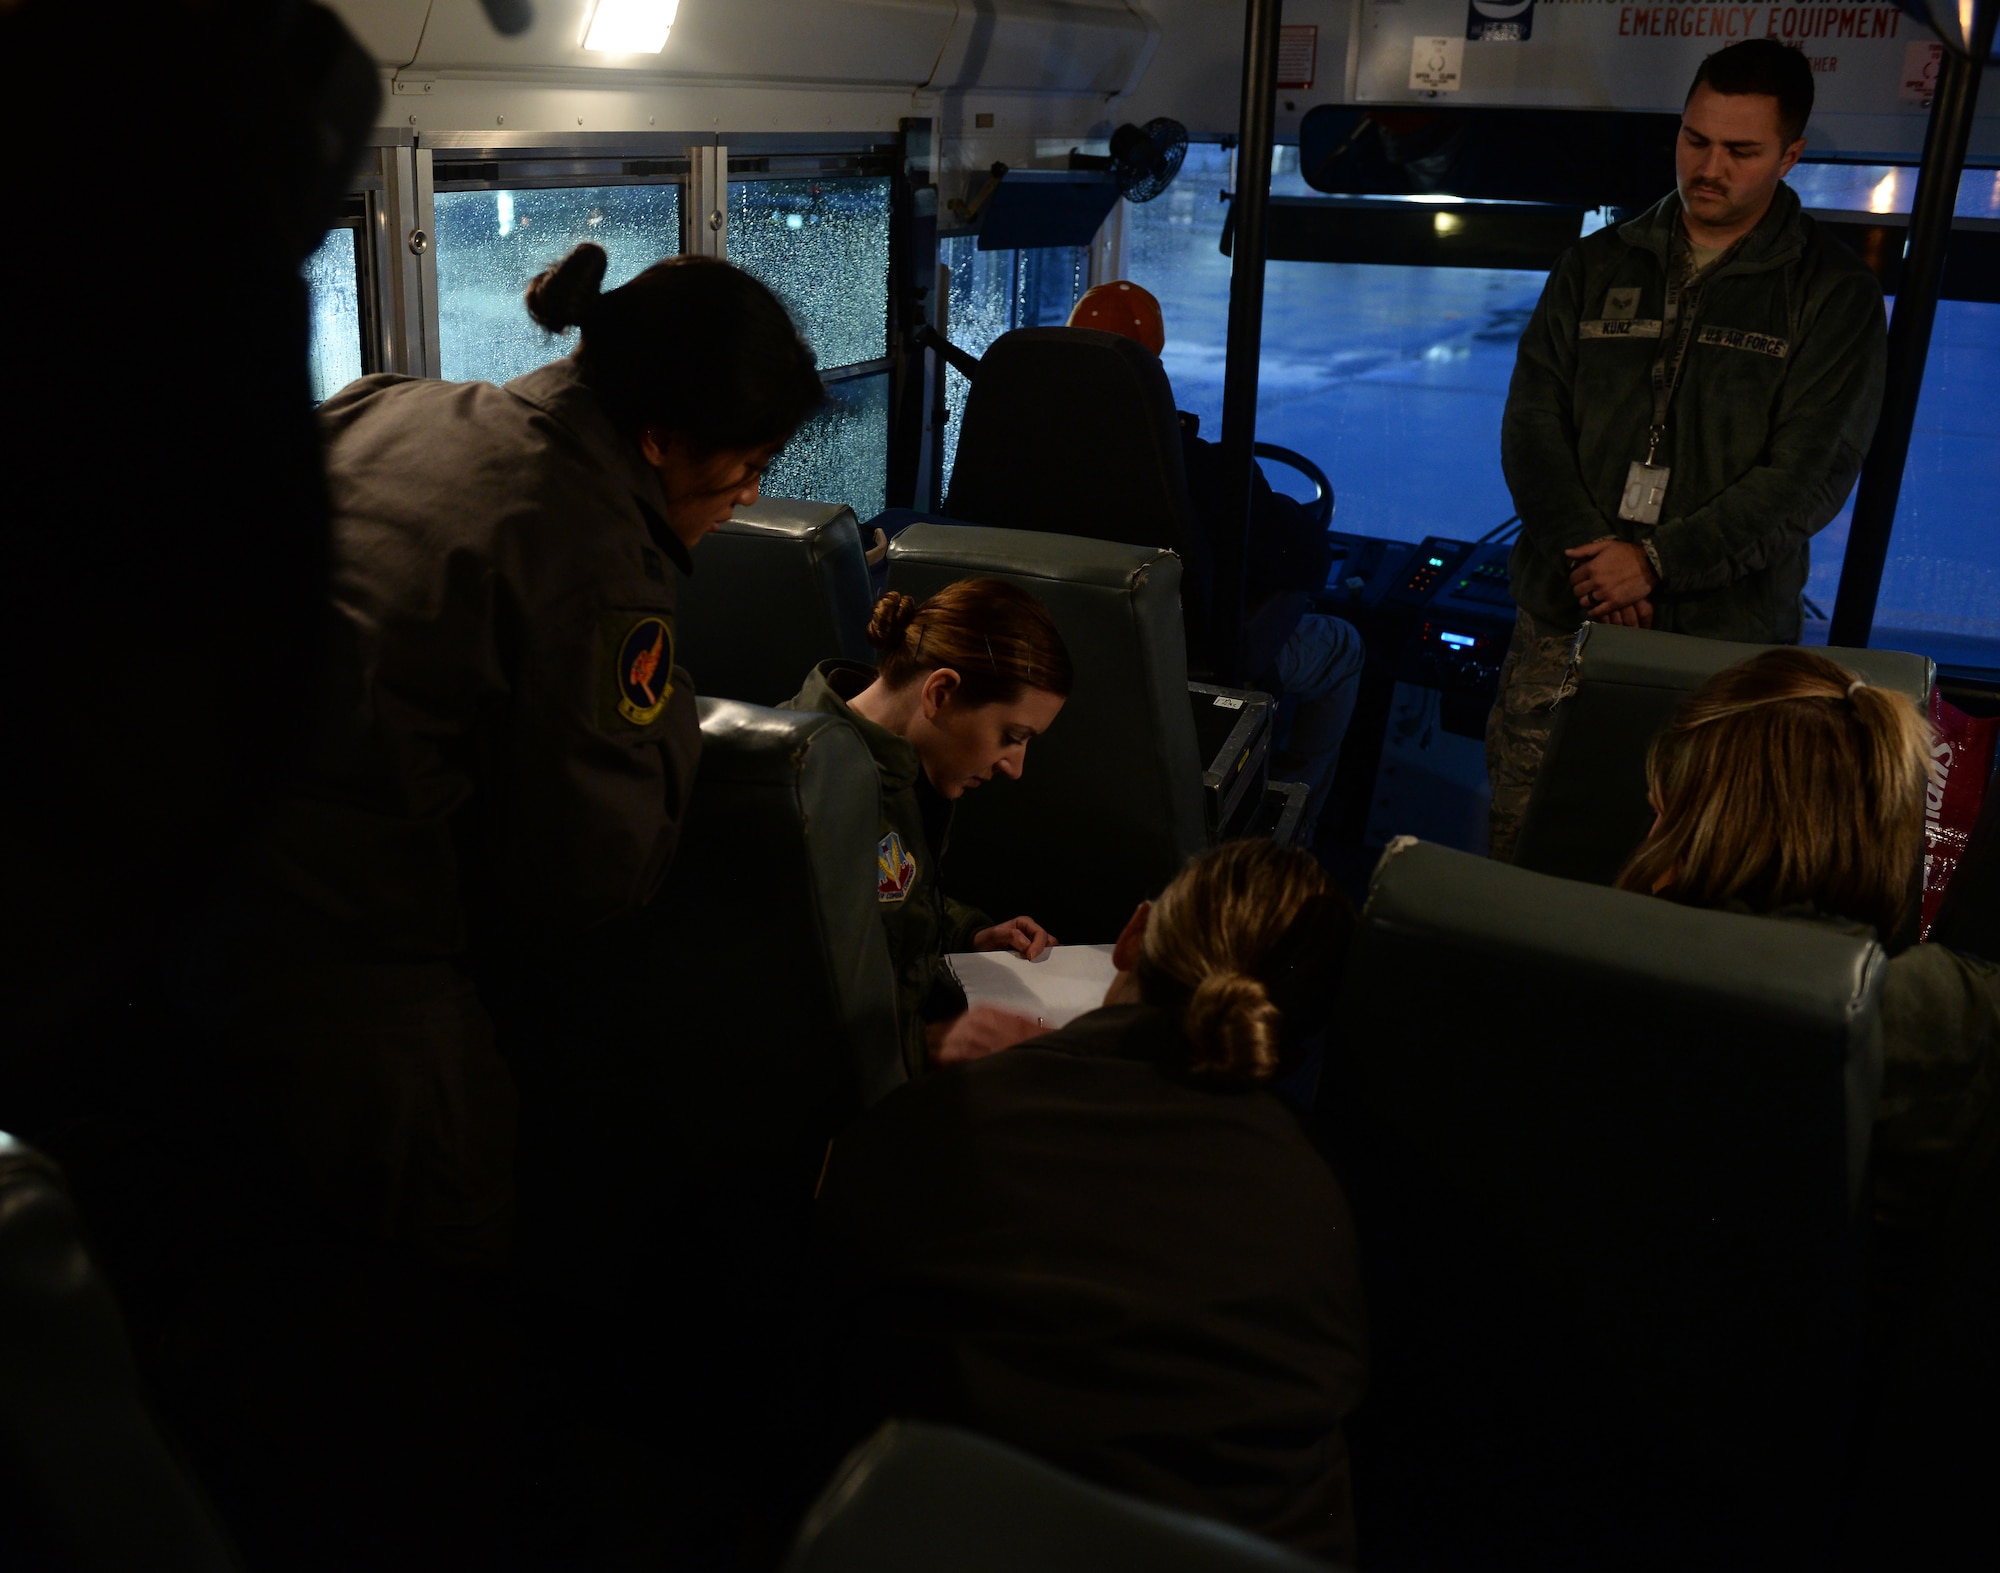 A group of female Airmen looking over a maintenance folder on a bus before departure.